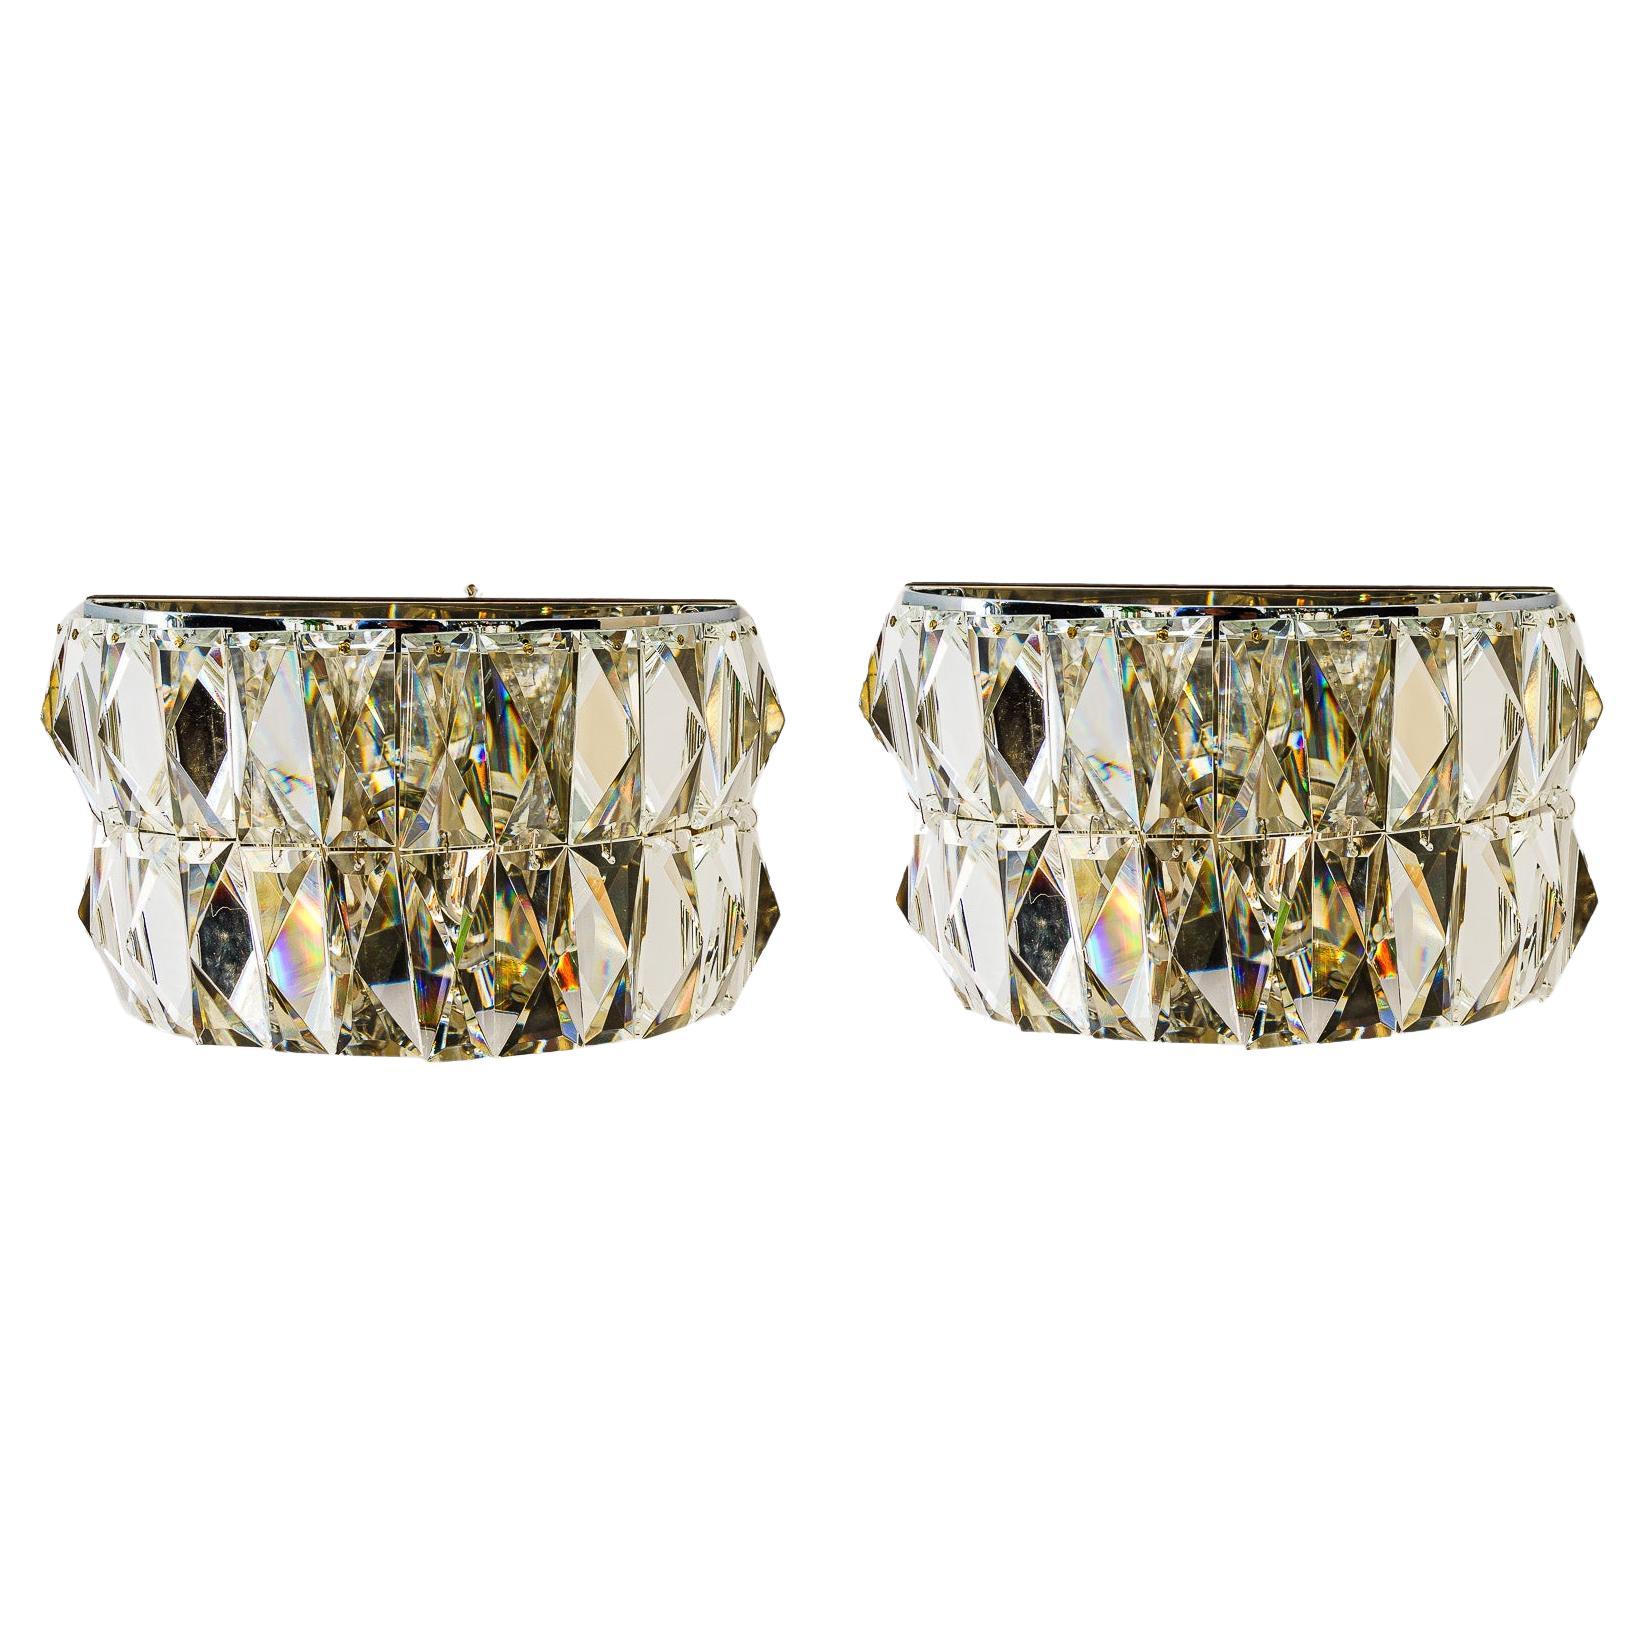 2 bakalowis nickel crystal wall lamps vienna around 1950s For Sale